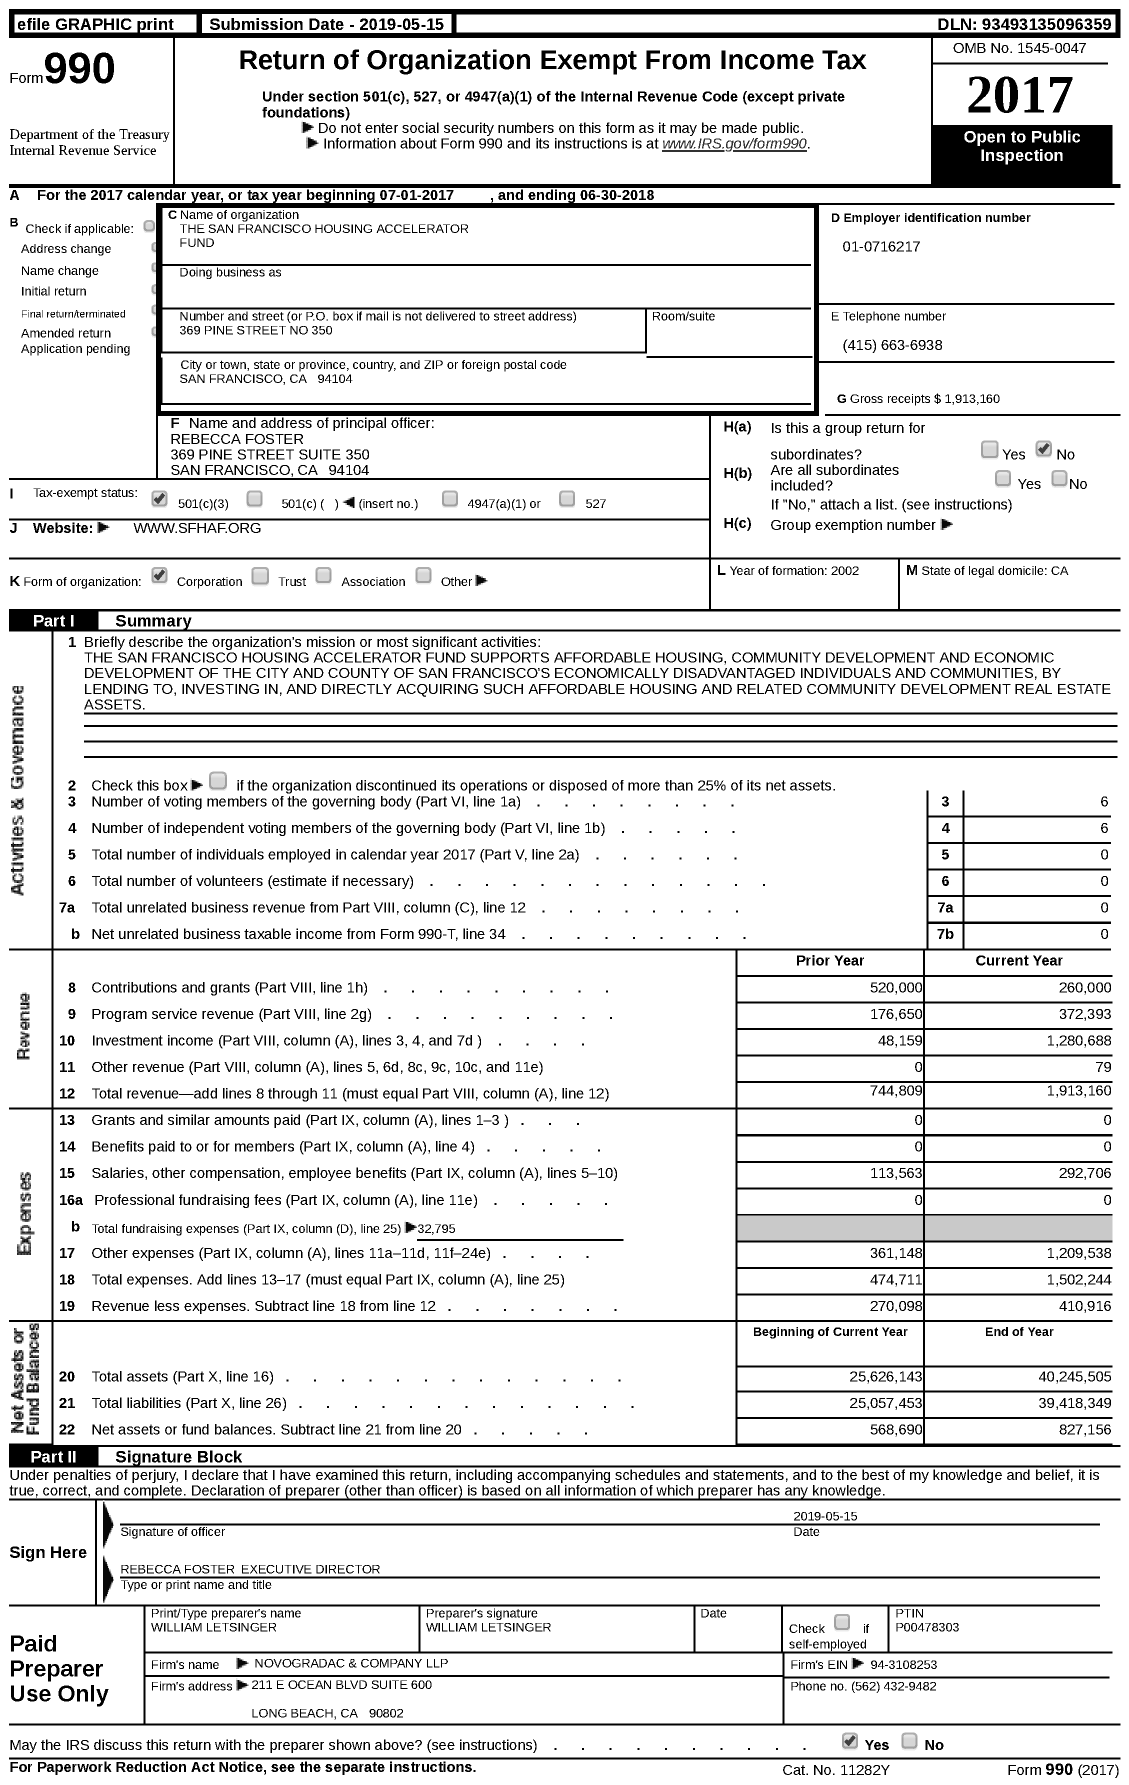 Image of first page of 2017 Form 990 for The San Francisco Housing Accelerator Fund